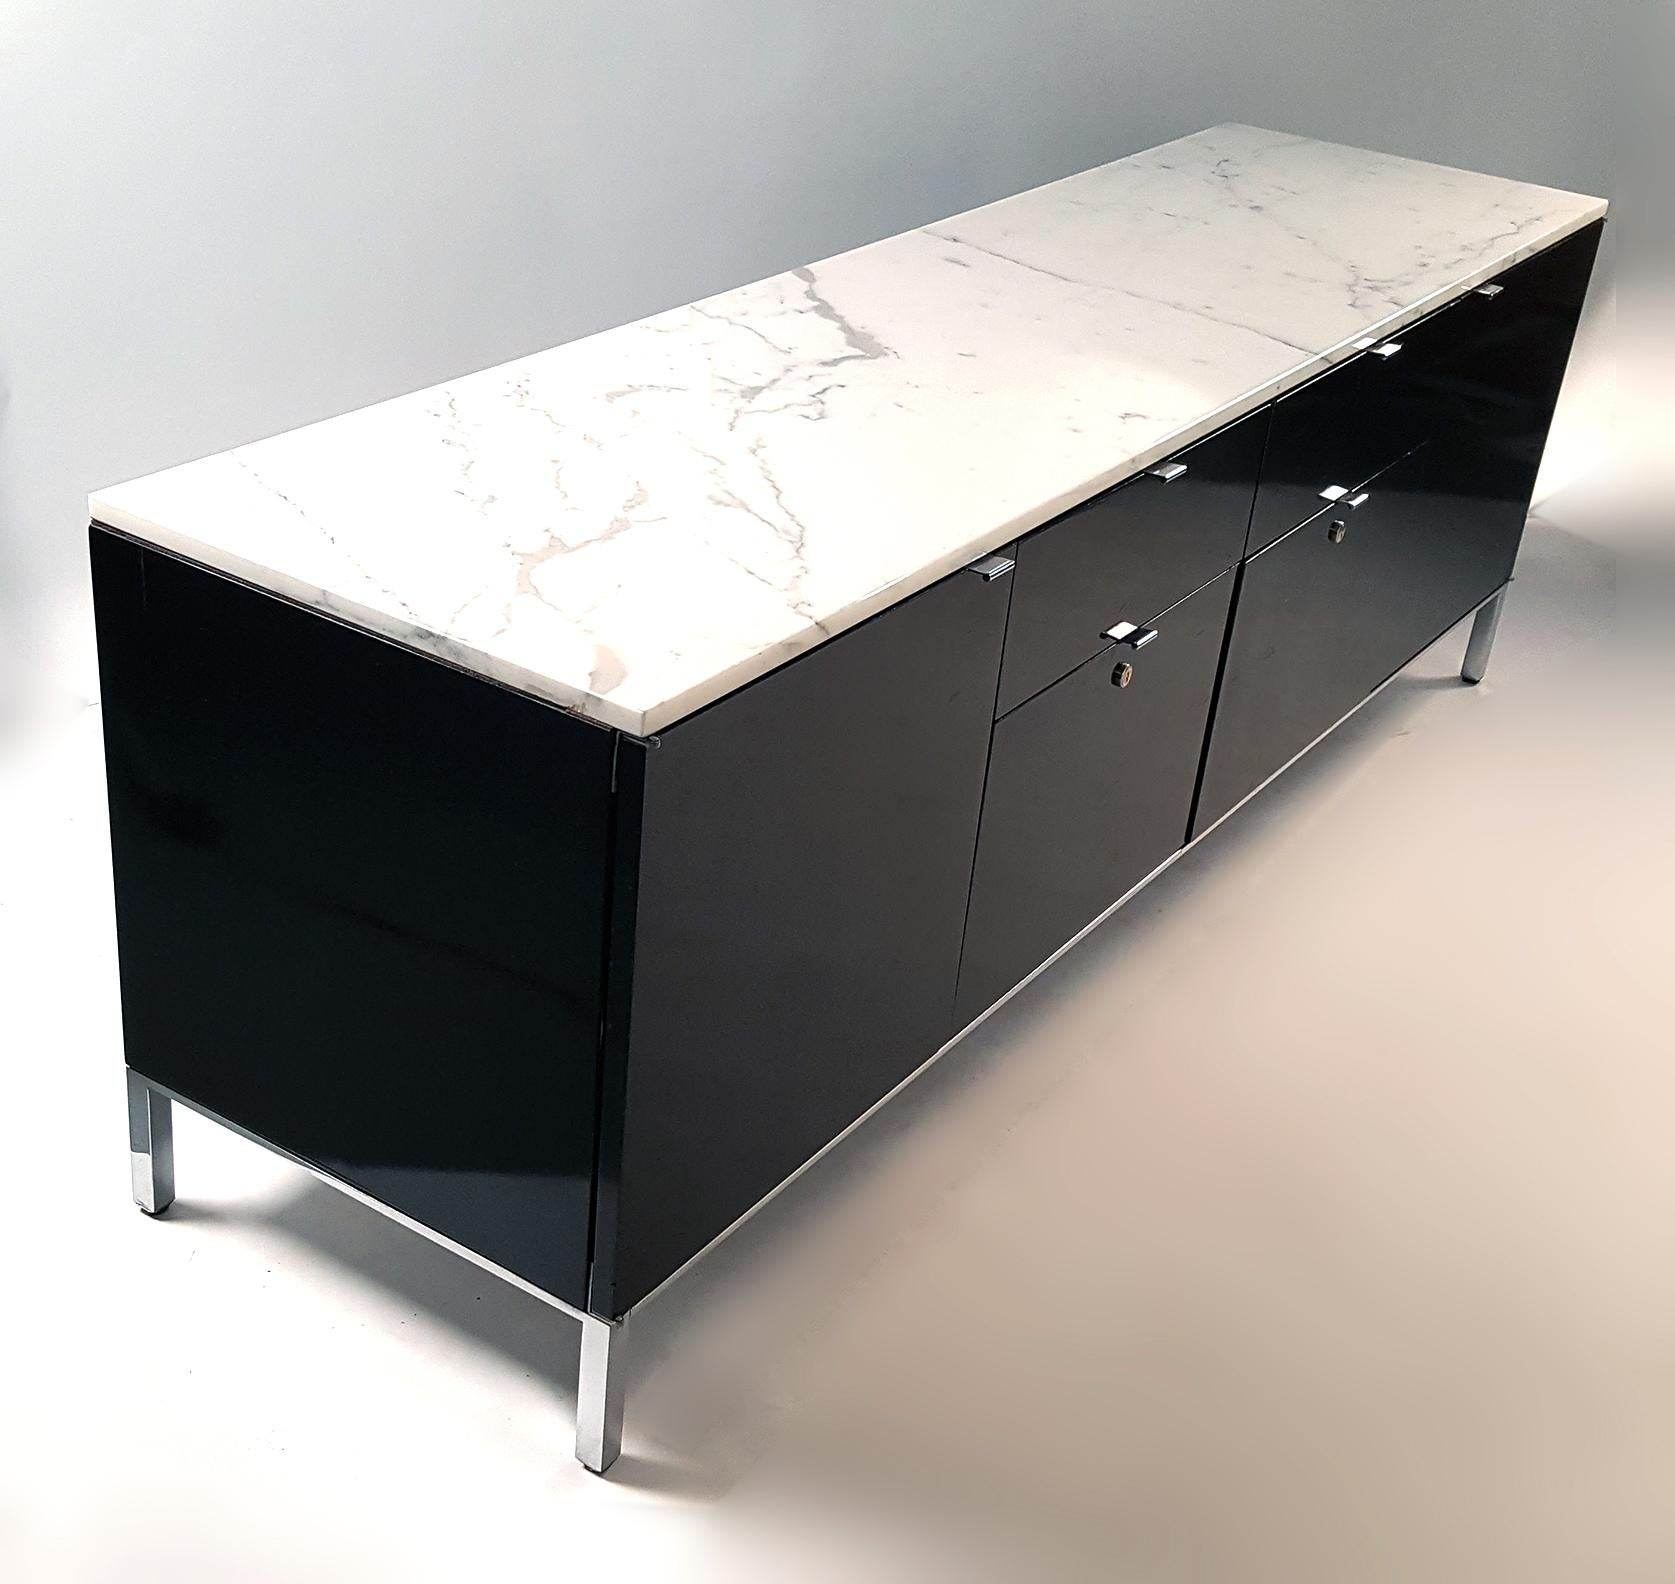 Beautiful credenza with matching file cabinet designed by Giacomo Buzzittan for Stow Davis. The matching set has Carrara marble tops, black lacquer cabinets with chromed steel bases and drawer pulls and will work great in any modern environment. The